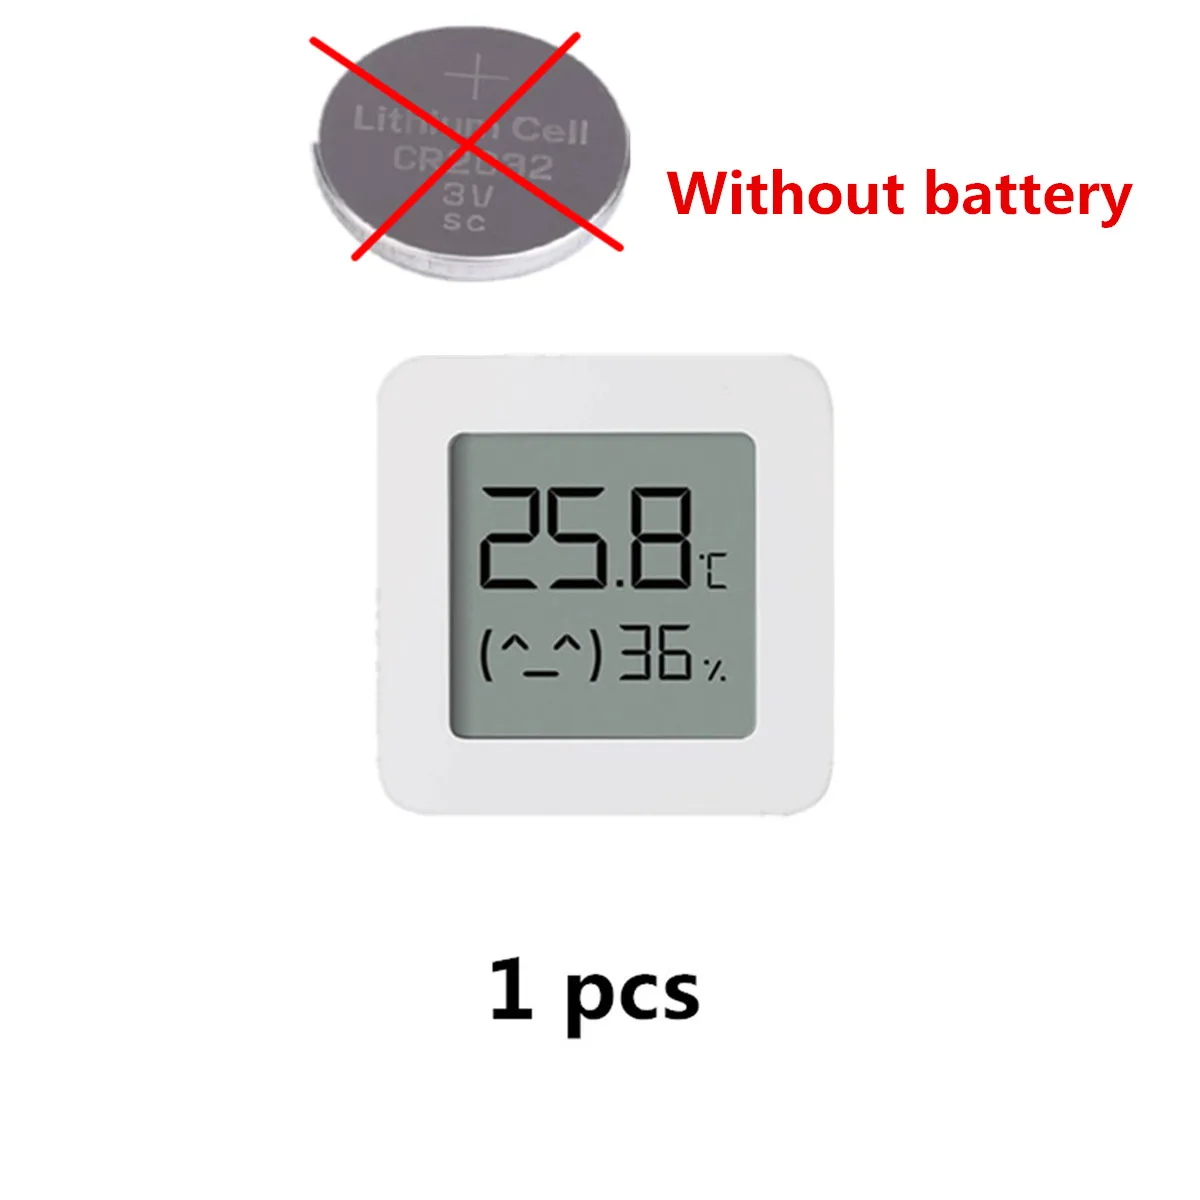 https://ae01.alicdn.com/kf/Haeab3715c8b14c4b84a019743b156c07e/XIAOMI-Mijia-Bluetooth-Thermometer-2-LCD-Screen-Moisture-Compatible-Wireless-Smart-Temperature-Humidity-Sensor-Without-Battery.jpg